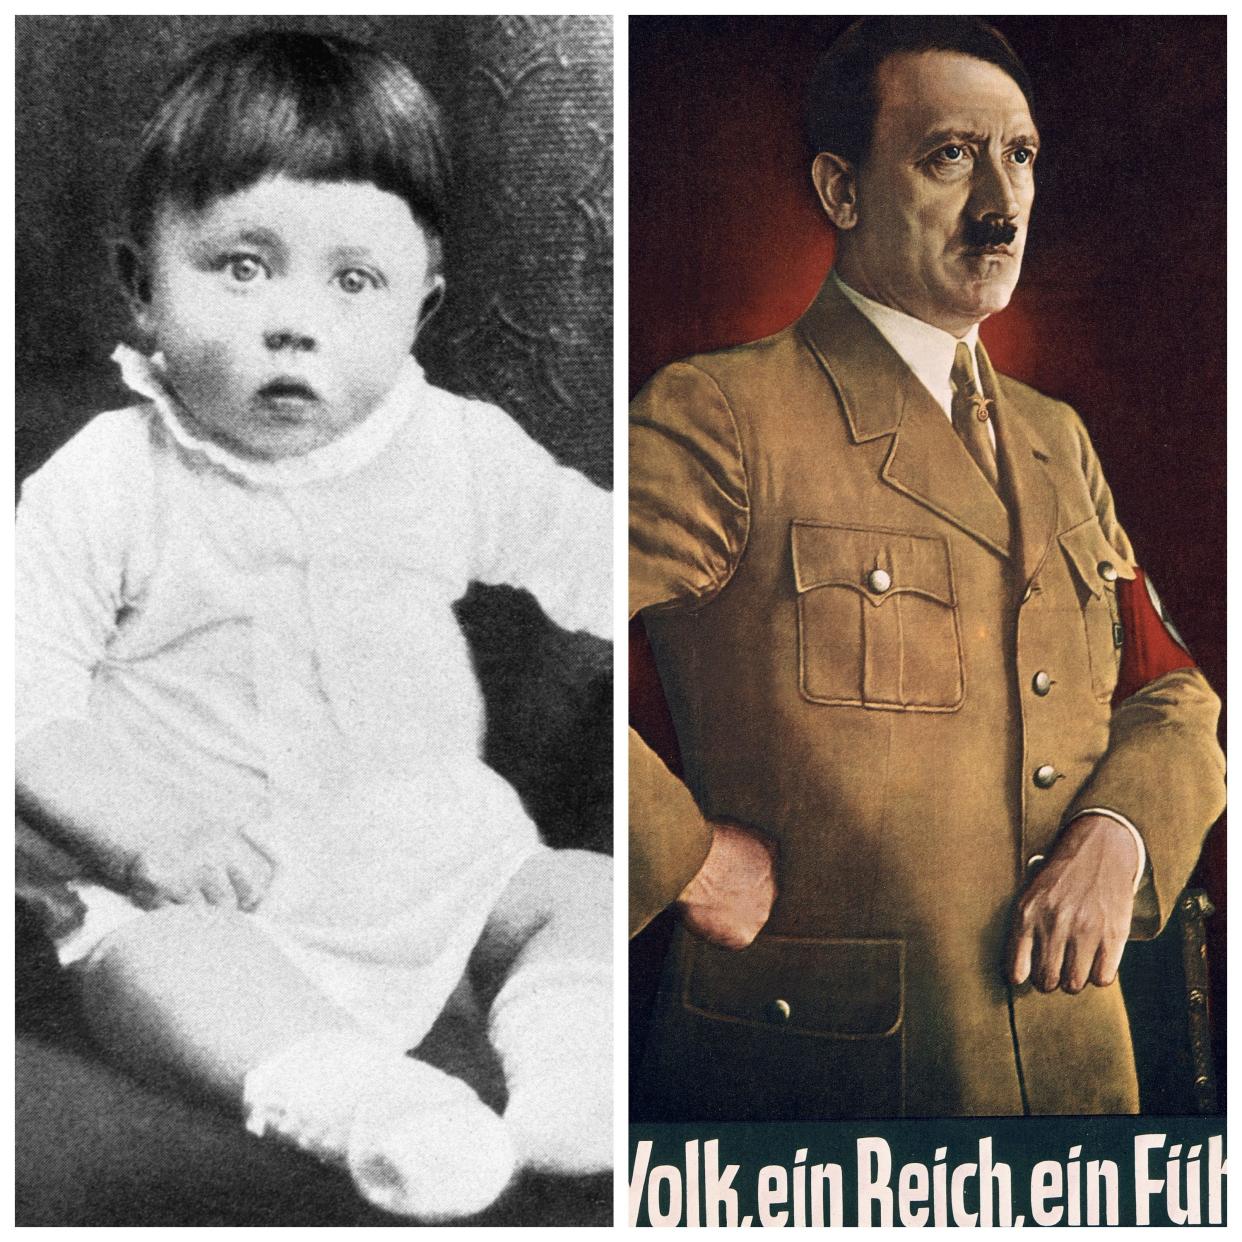 A photo of Adolf Hitler as a baby alongside a propaganda poster of him as an adult.